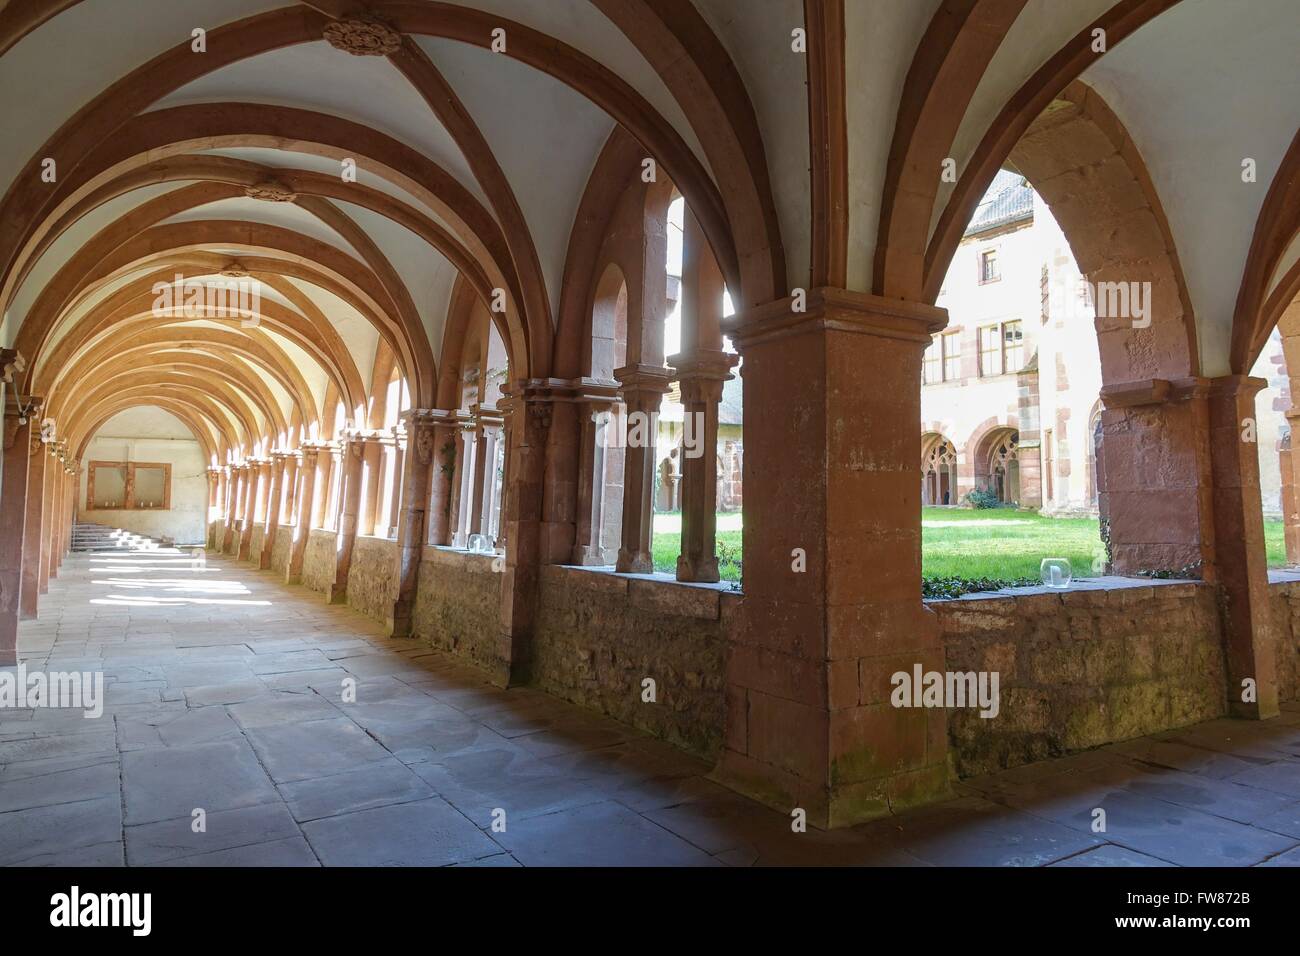 Germany: Cloister of Bronnbach Monastery, Baden-Württemberg. Photo from 26. March 2016. Stock Photo